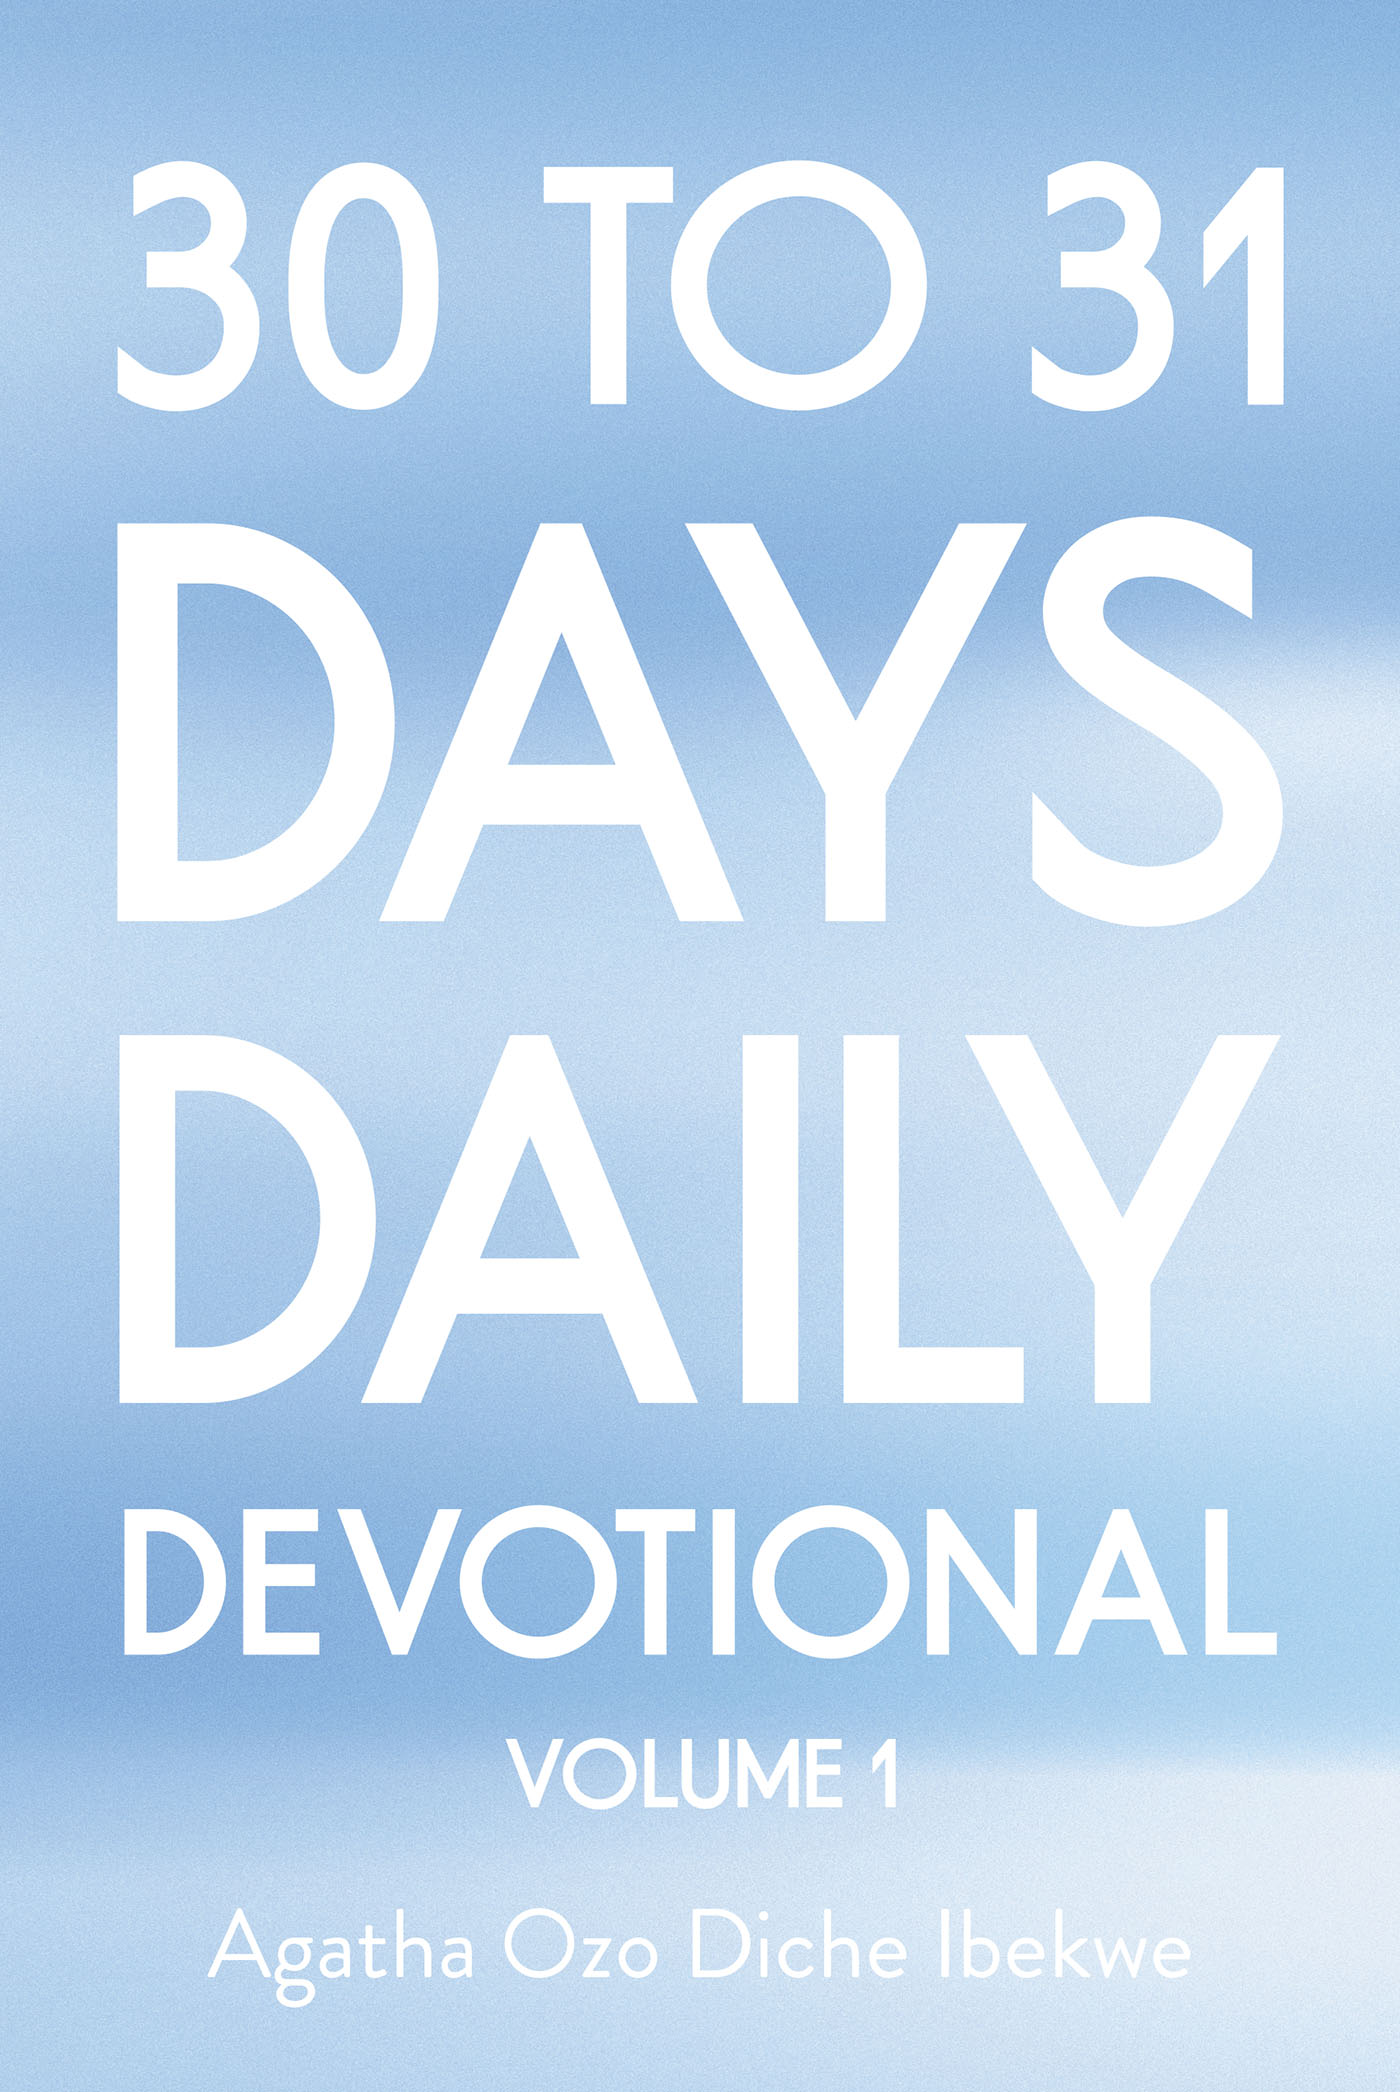 Agatha Ozo Diche Ibekwe’s Newly Released “30 TO 31 DAYS DAILY DEVOTIONAL: VOLUME 1” is an Engaging Resource for Spiritual Nourishment